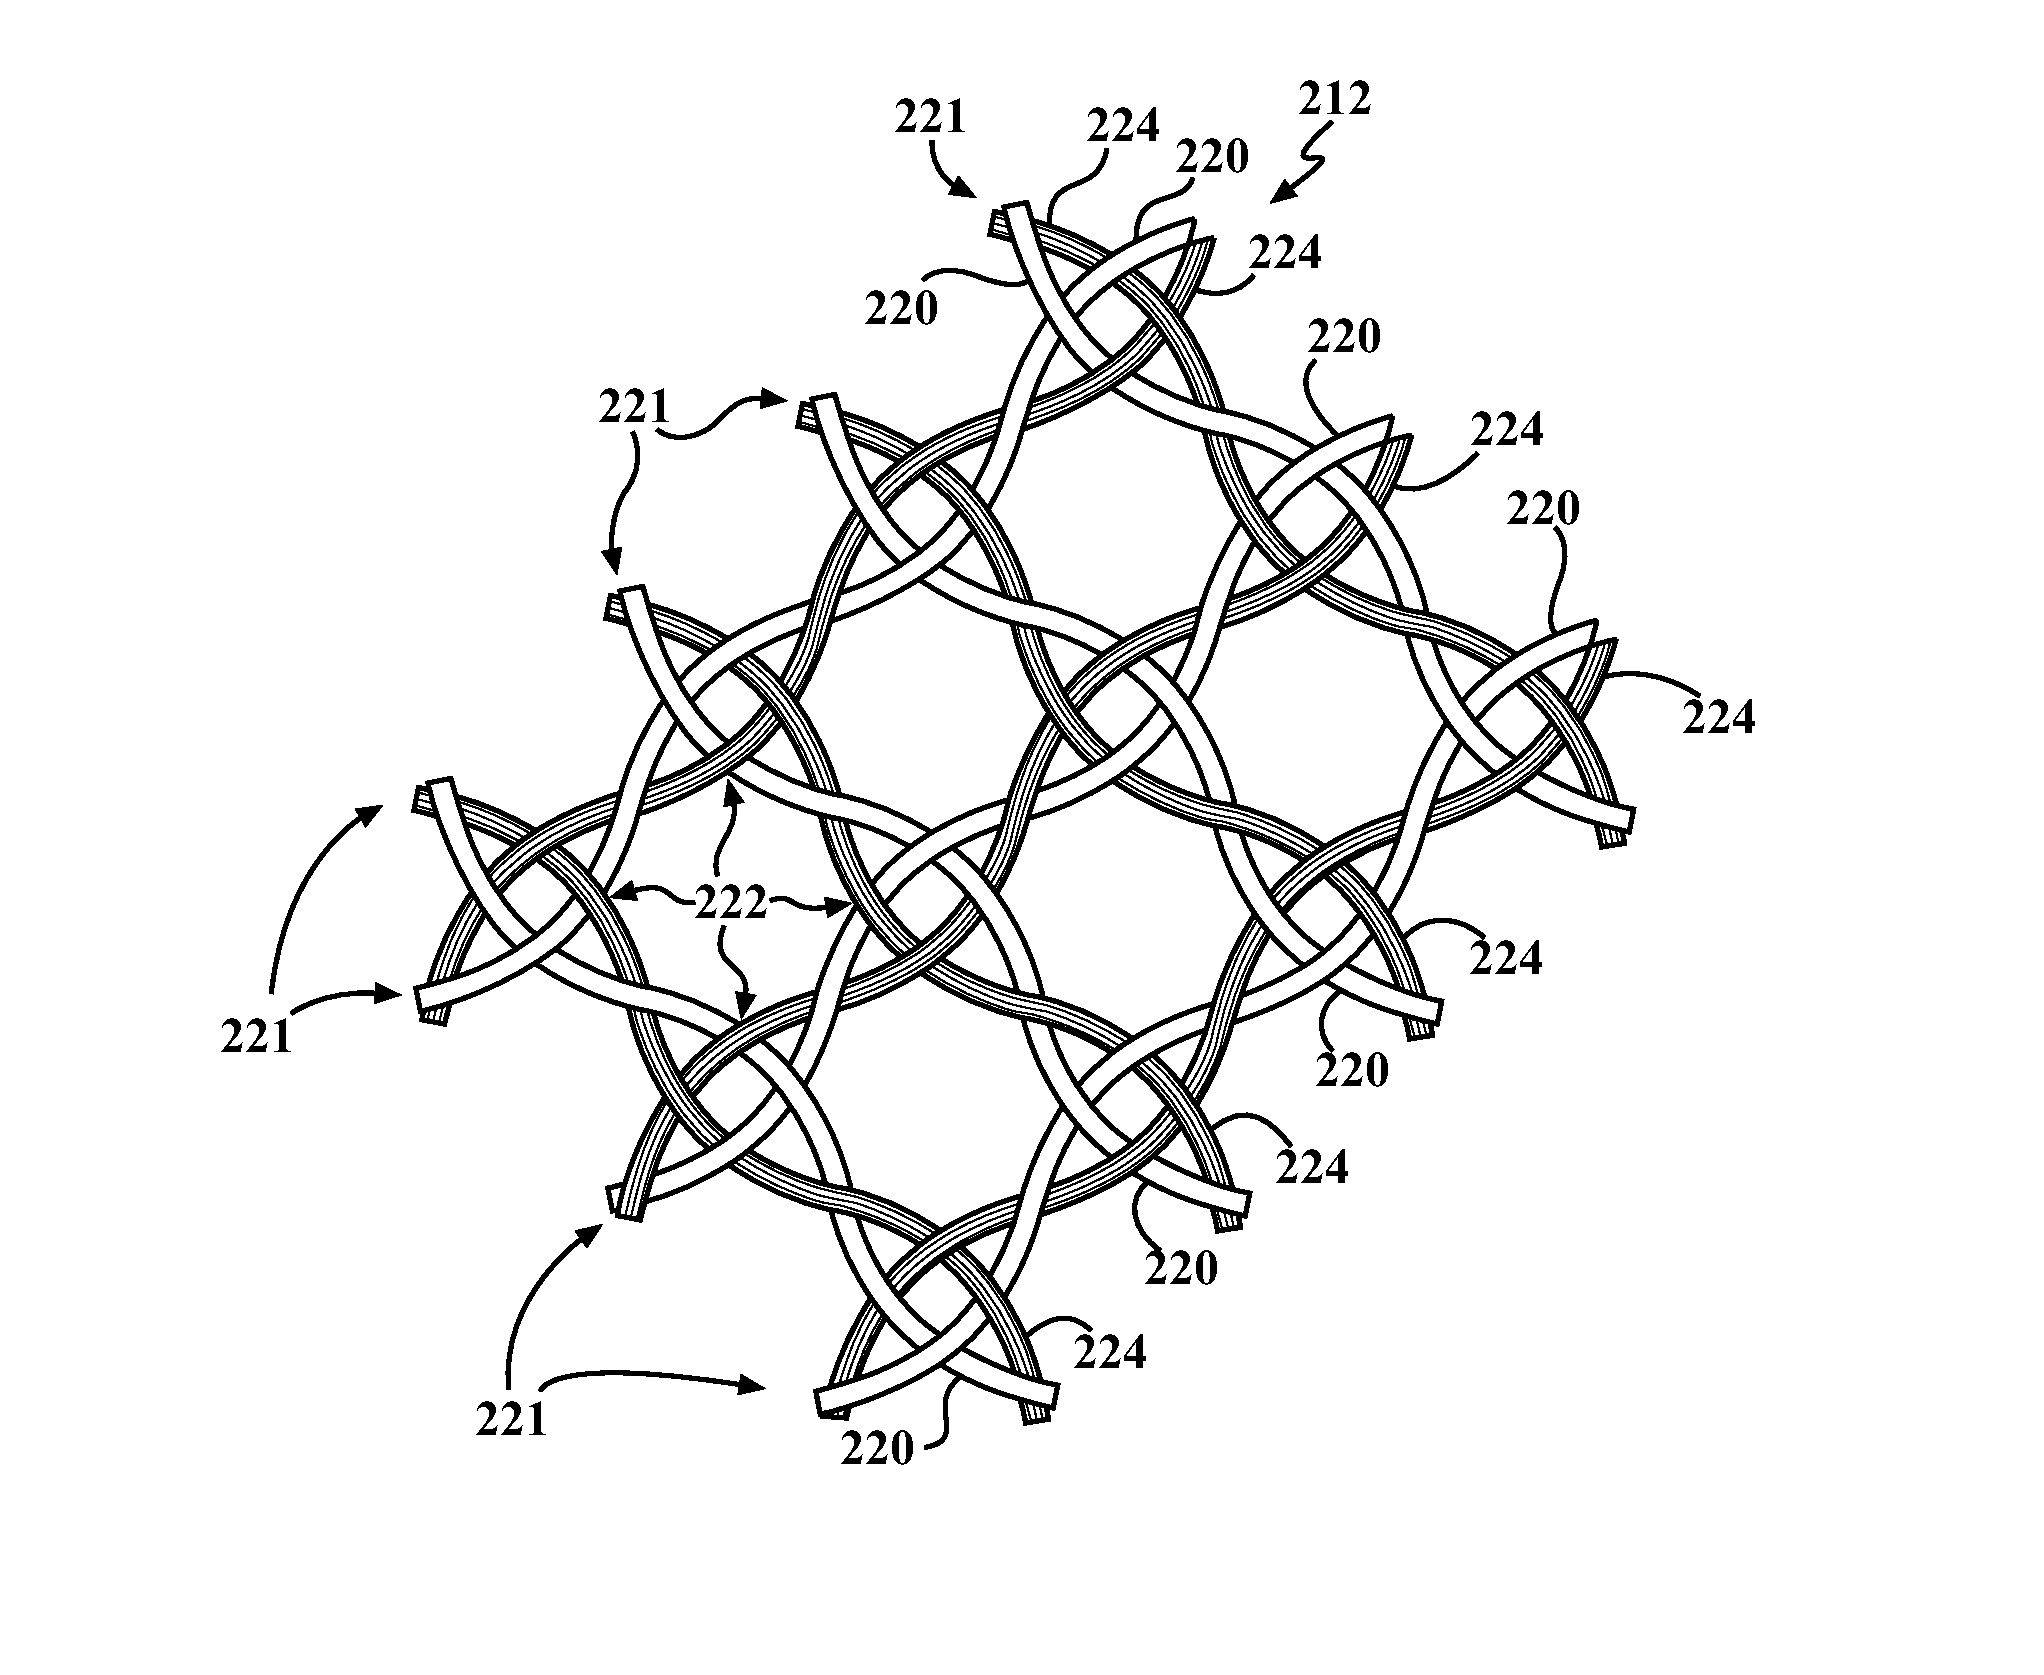 Braided textile sleeve with self-sustaining expanded and contracted states and method of construction thereof